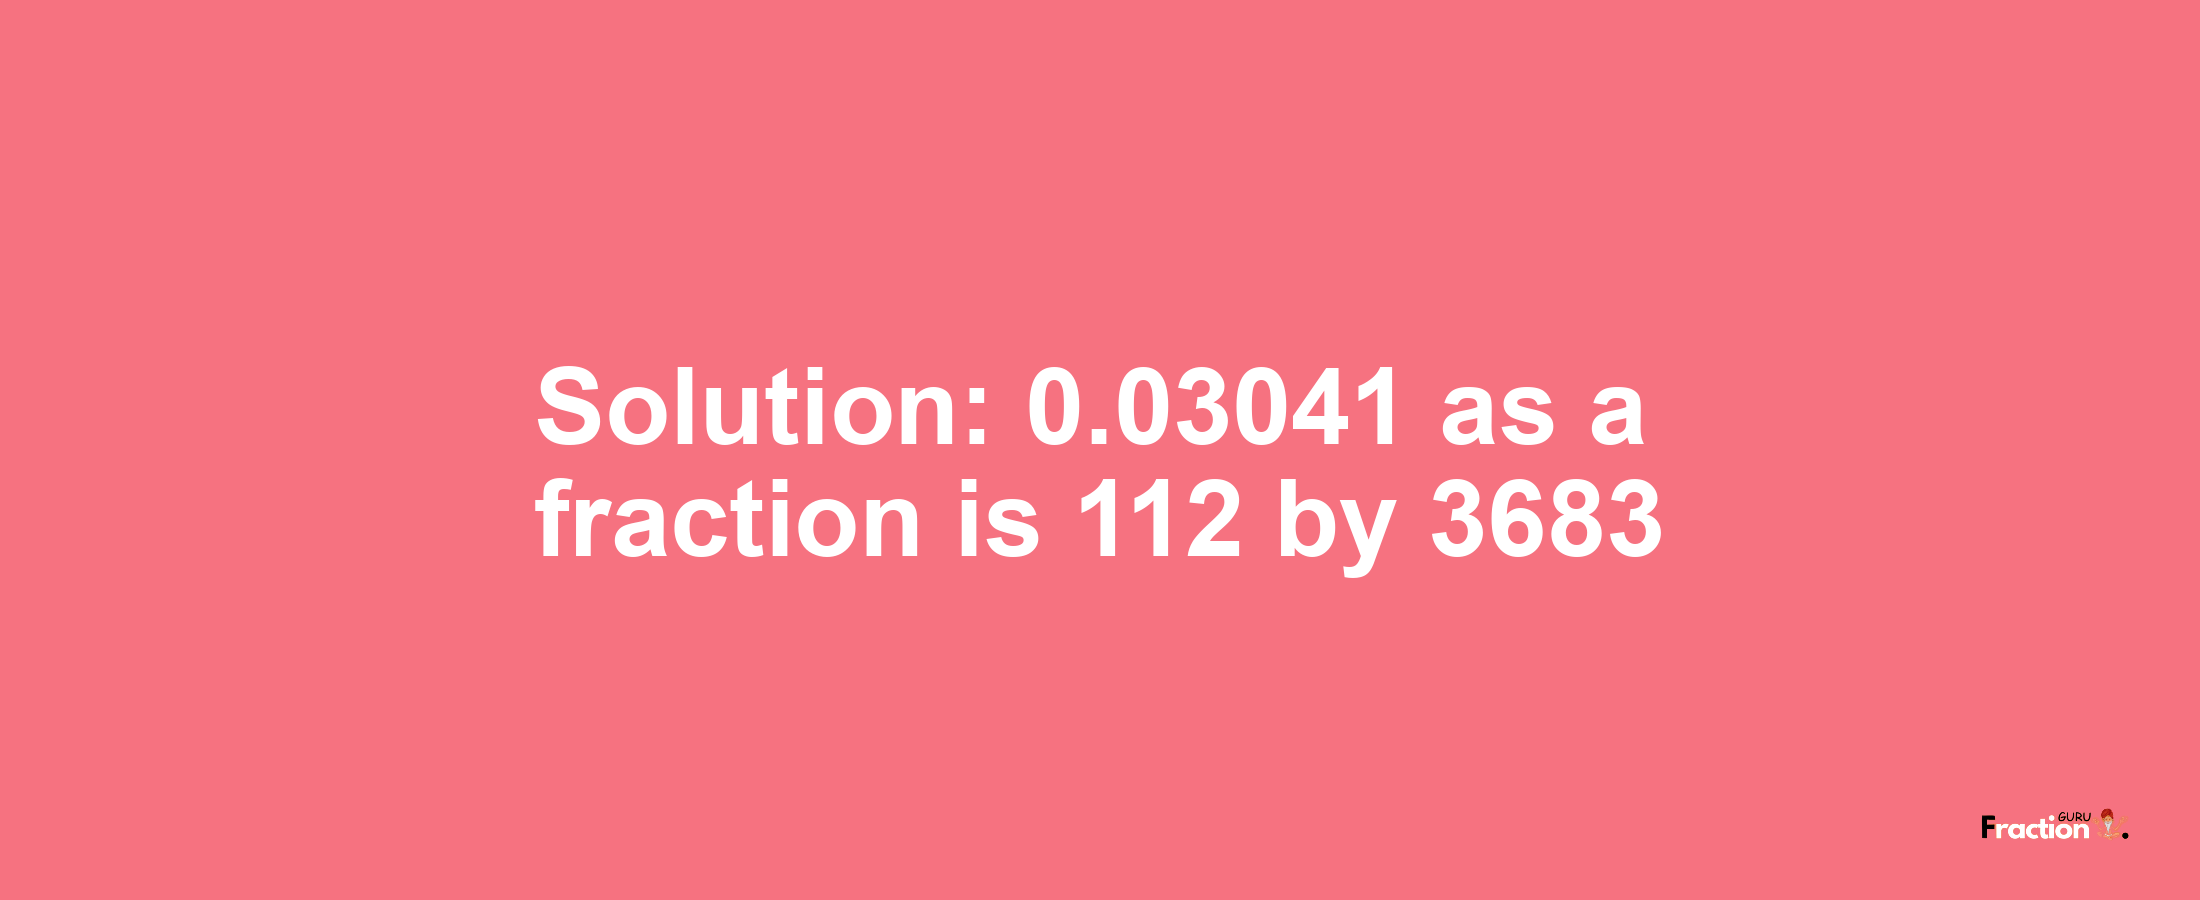 Solution:0.03041 as a fraction is 112/3683